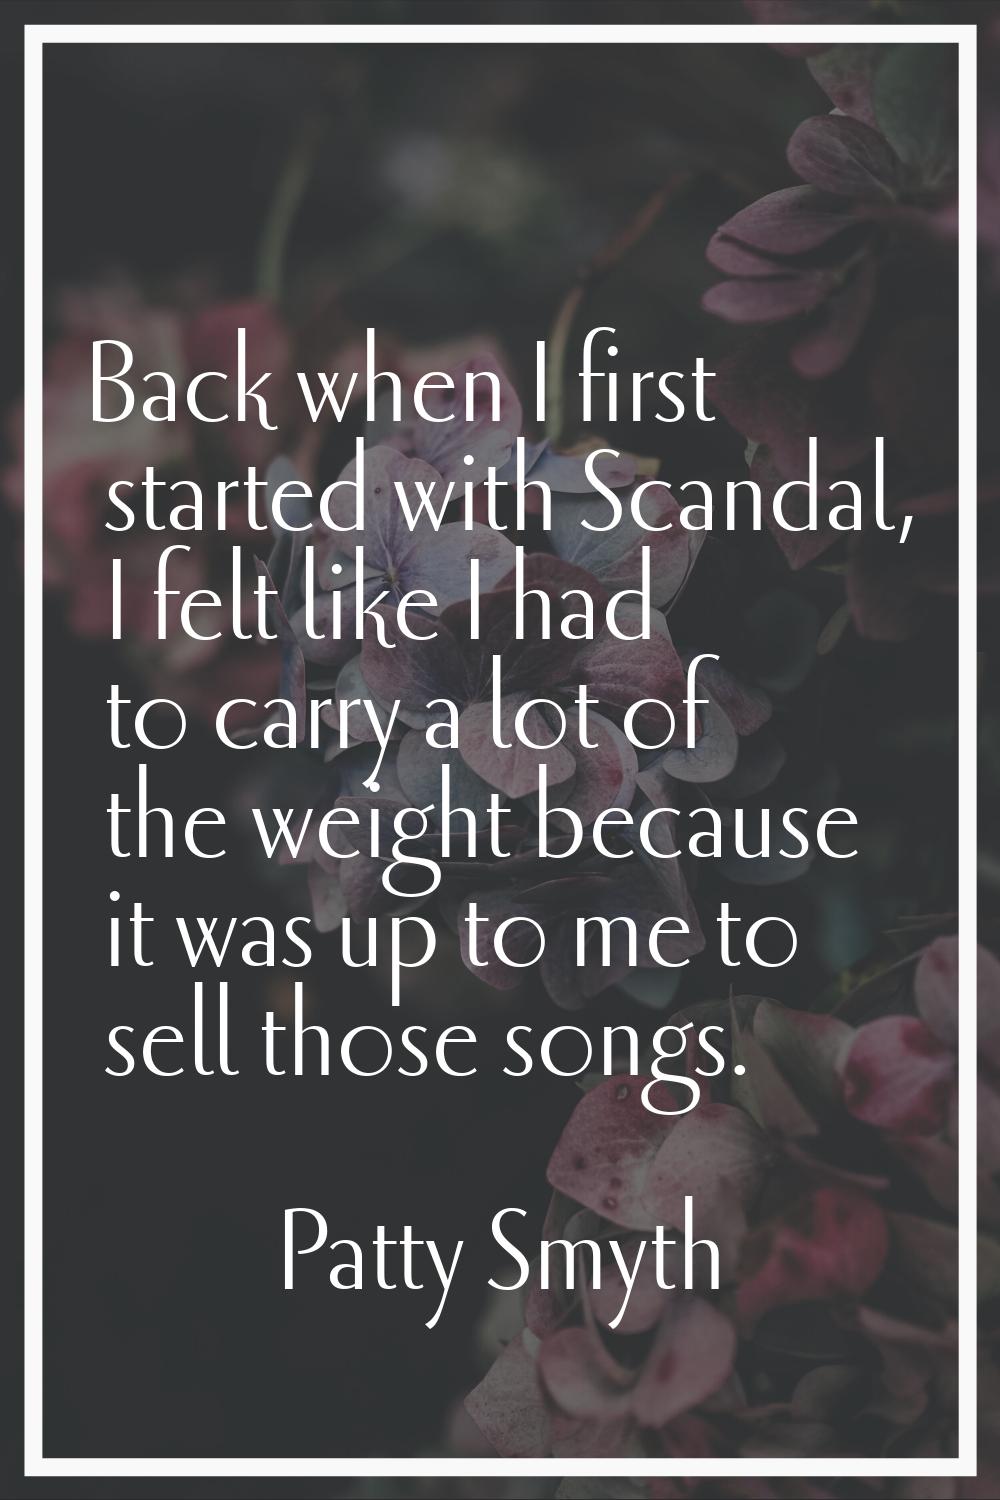 Back when I first started with Scandal, I felt like I had to carry a lot of the weight because it w